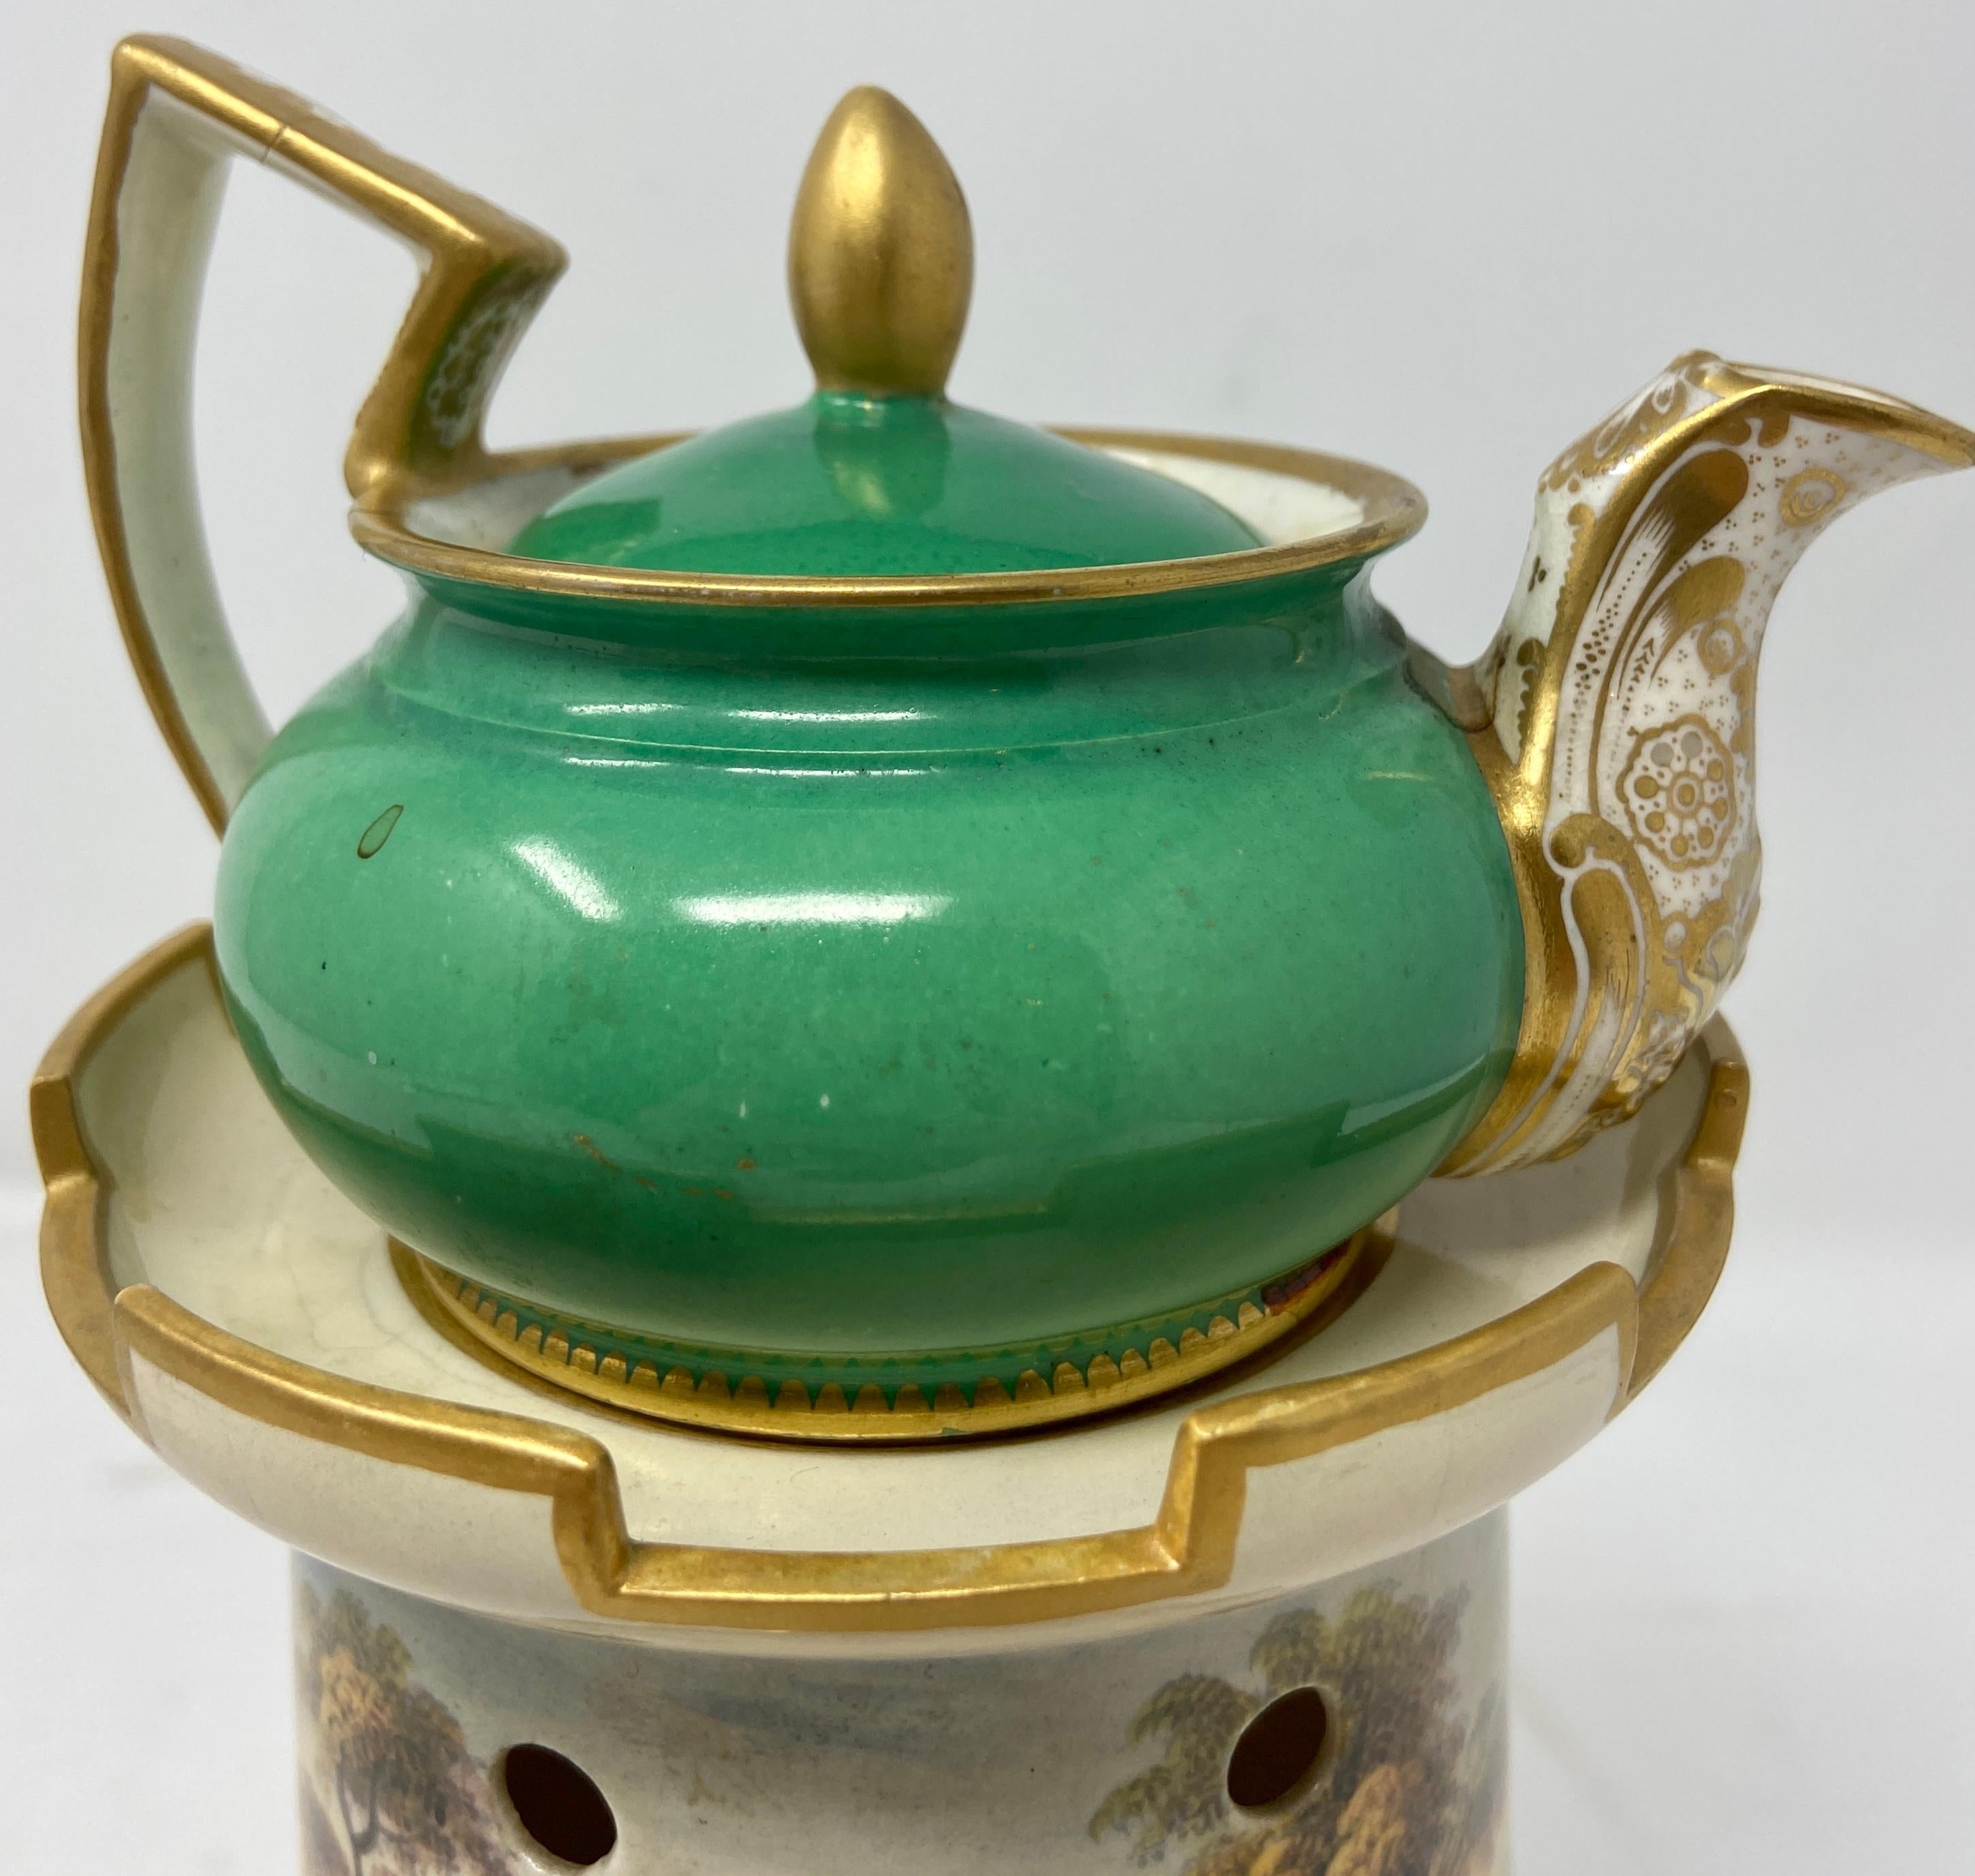 Antique 19th century French emerald green porcelain 